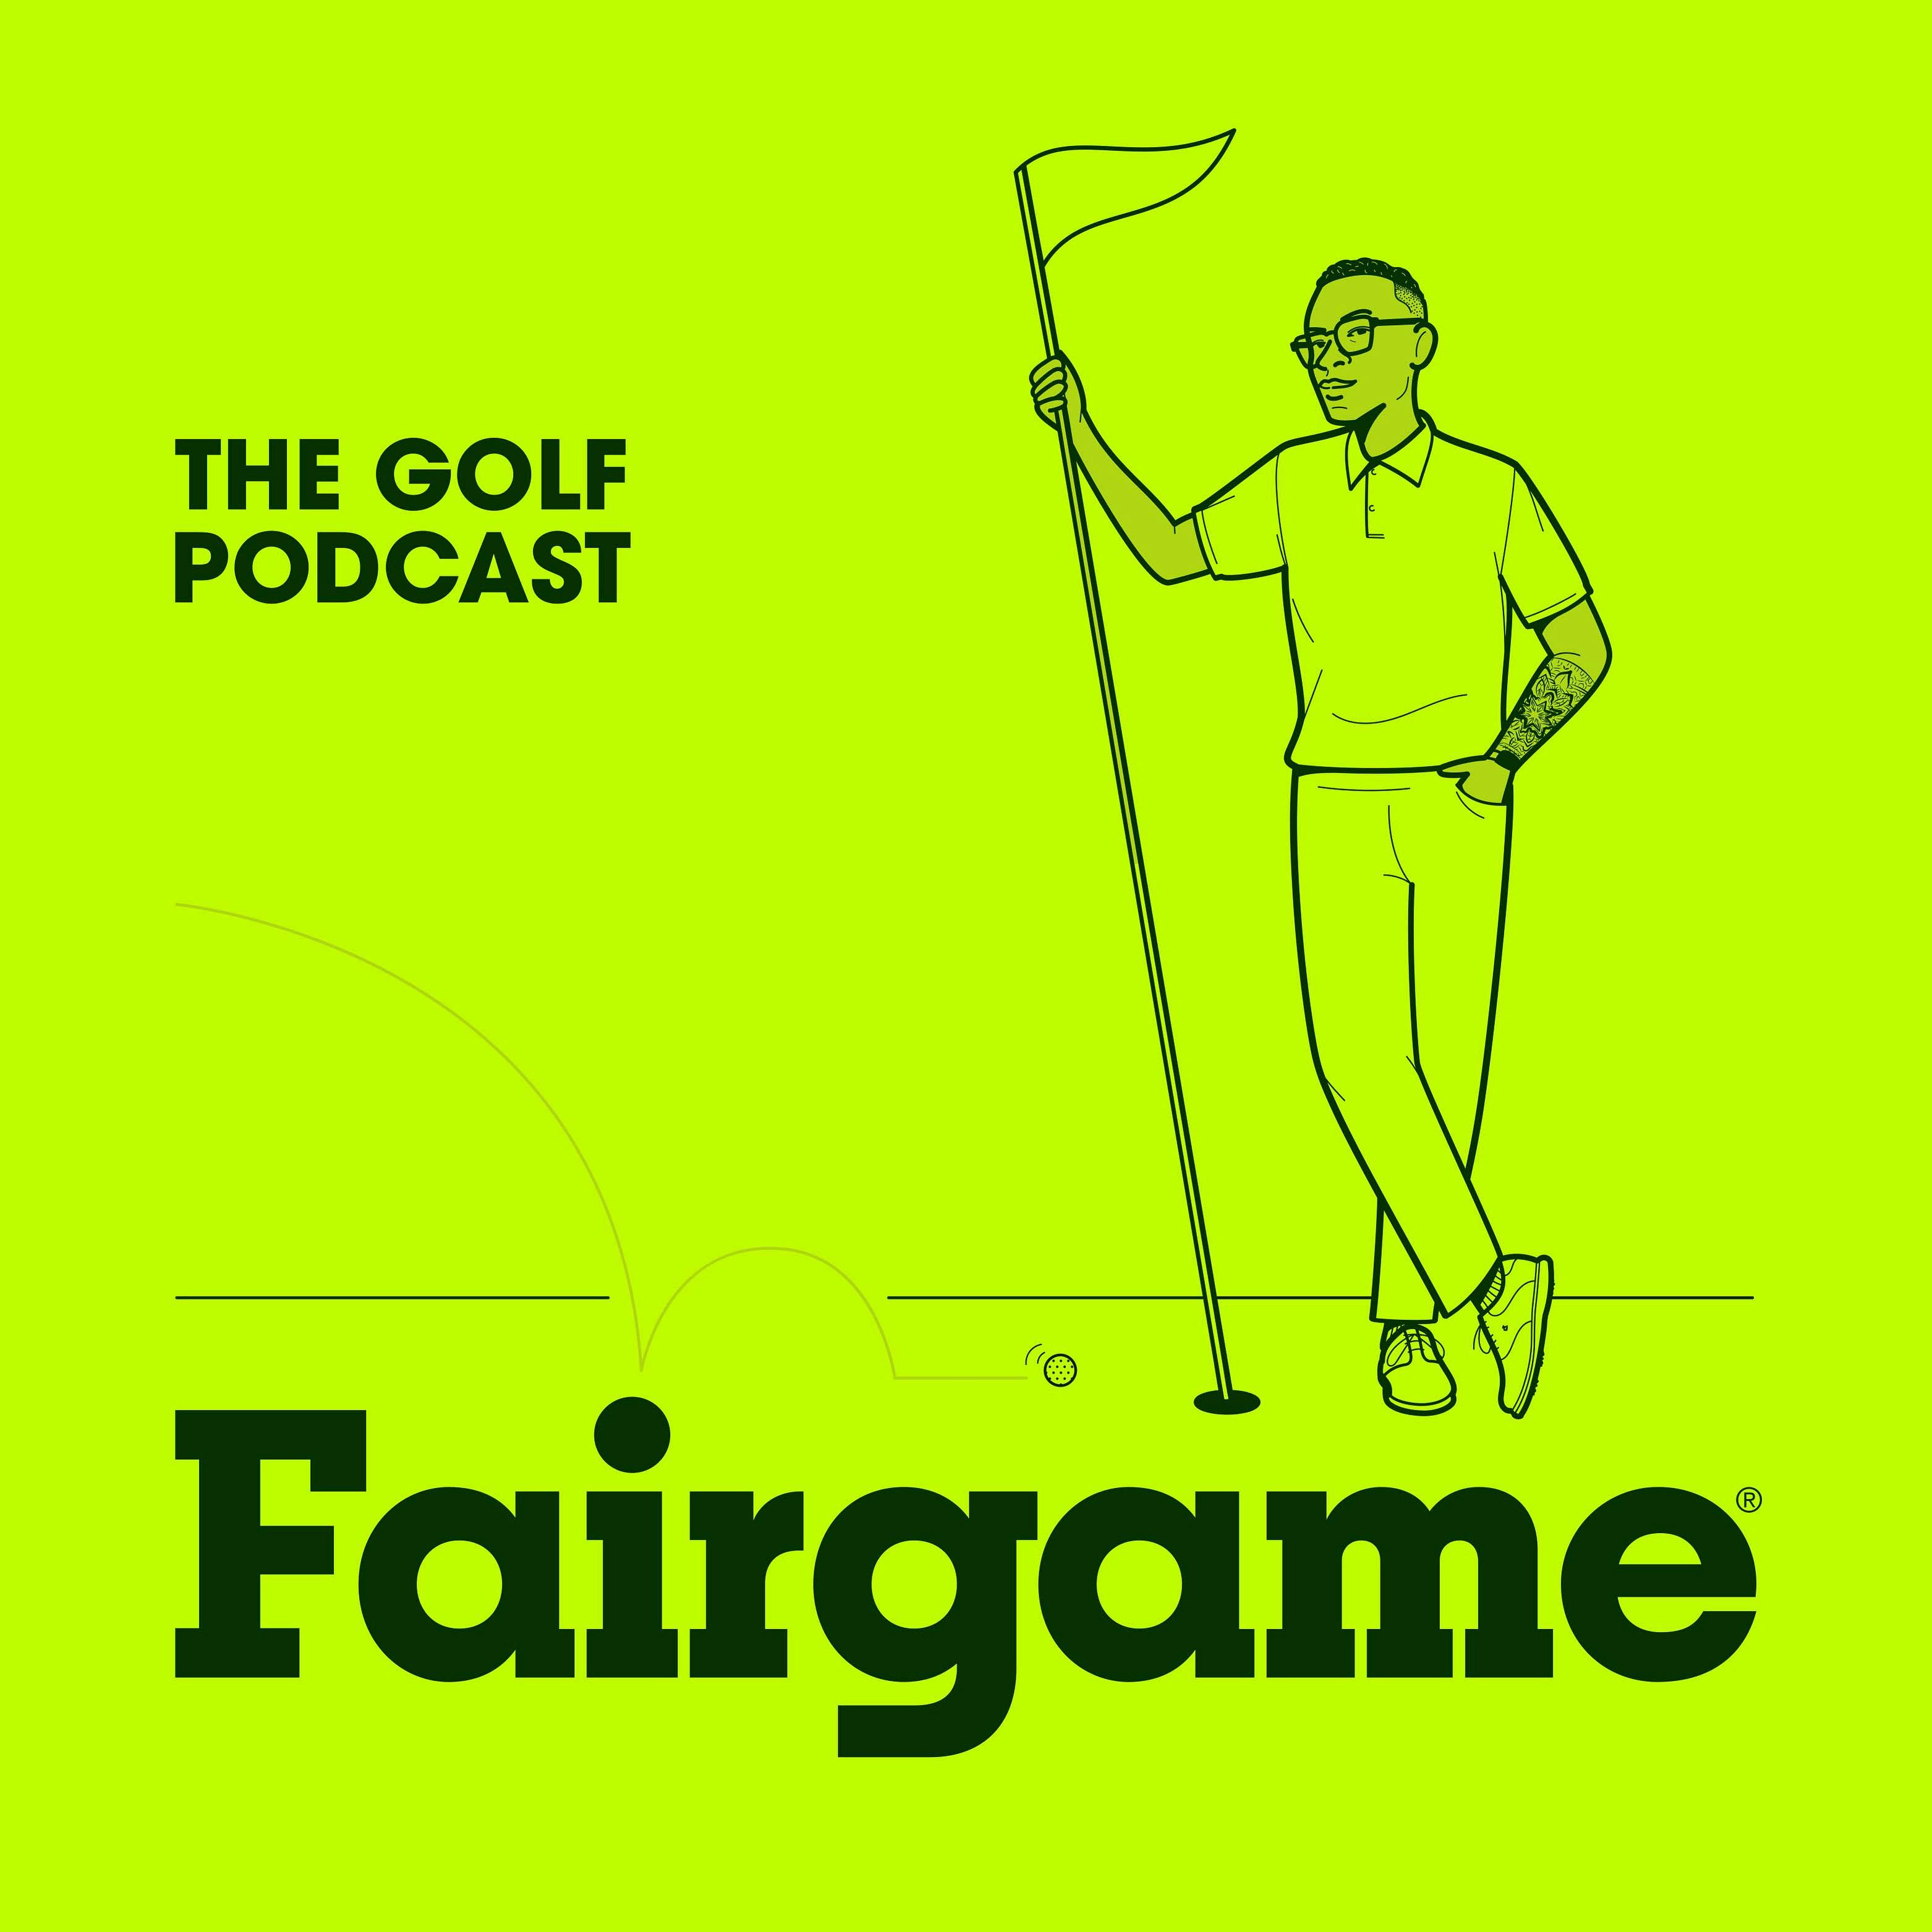 Episode 19: Is it Time for New Clubs? More Lessons? Maybe Both?